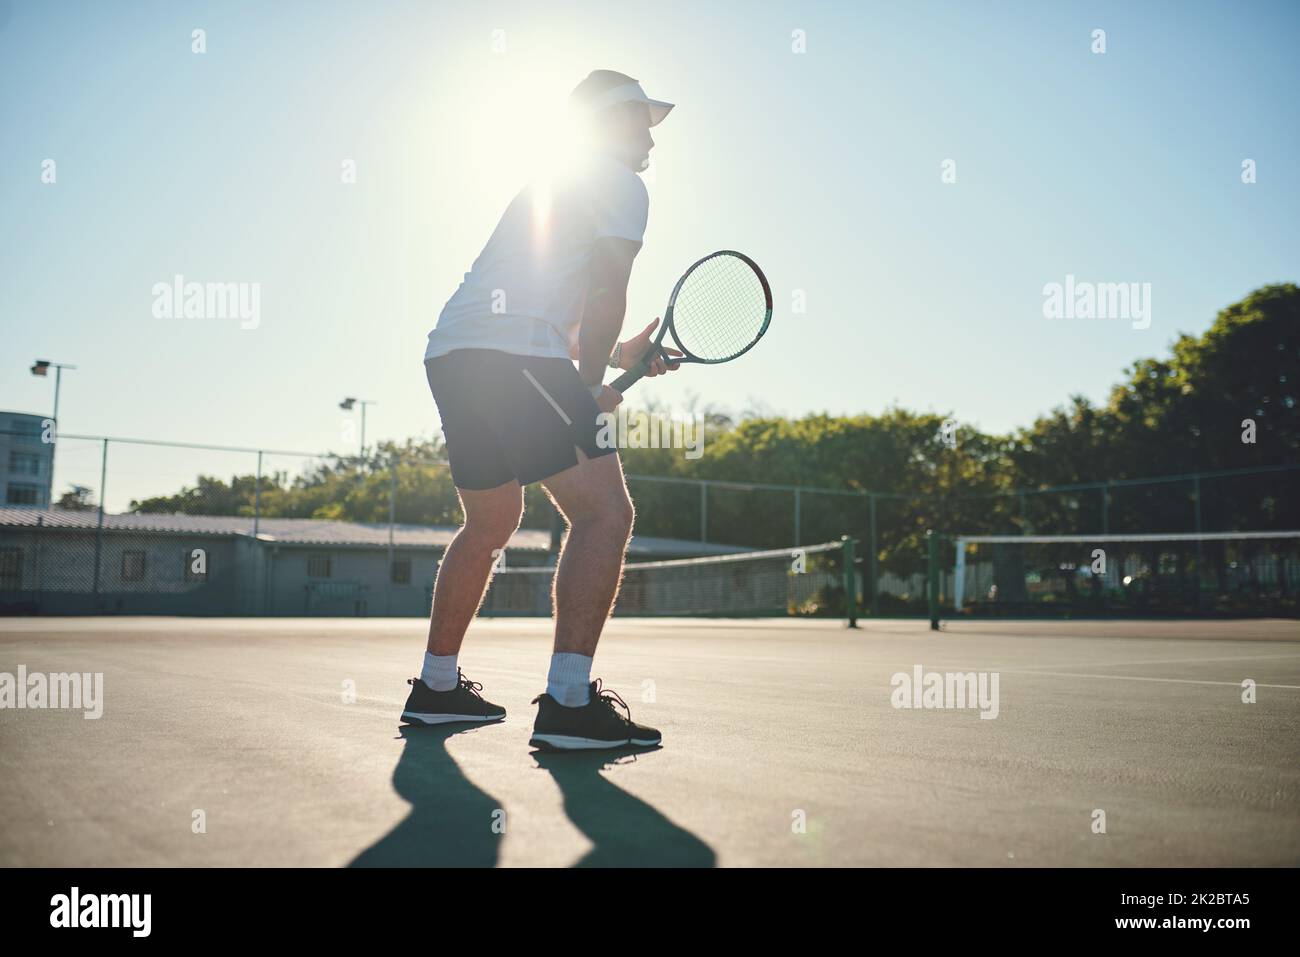 Be fair and play hard. Shot of a sporty young man playing tennis on a tennis court. Stock Photo